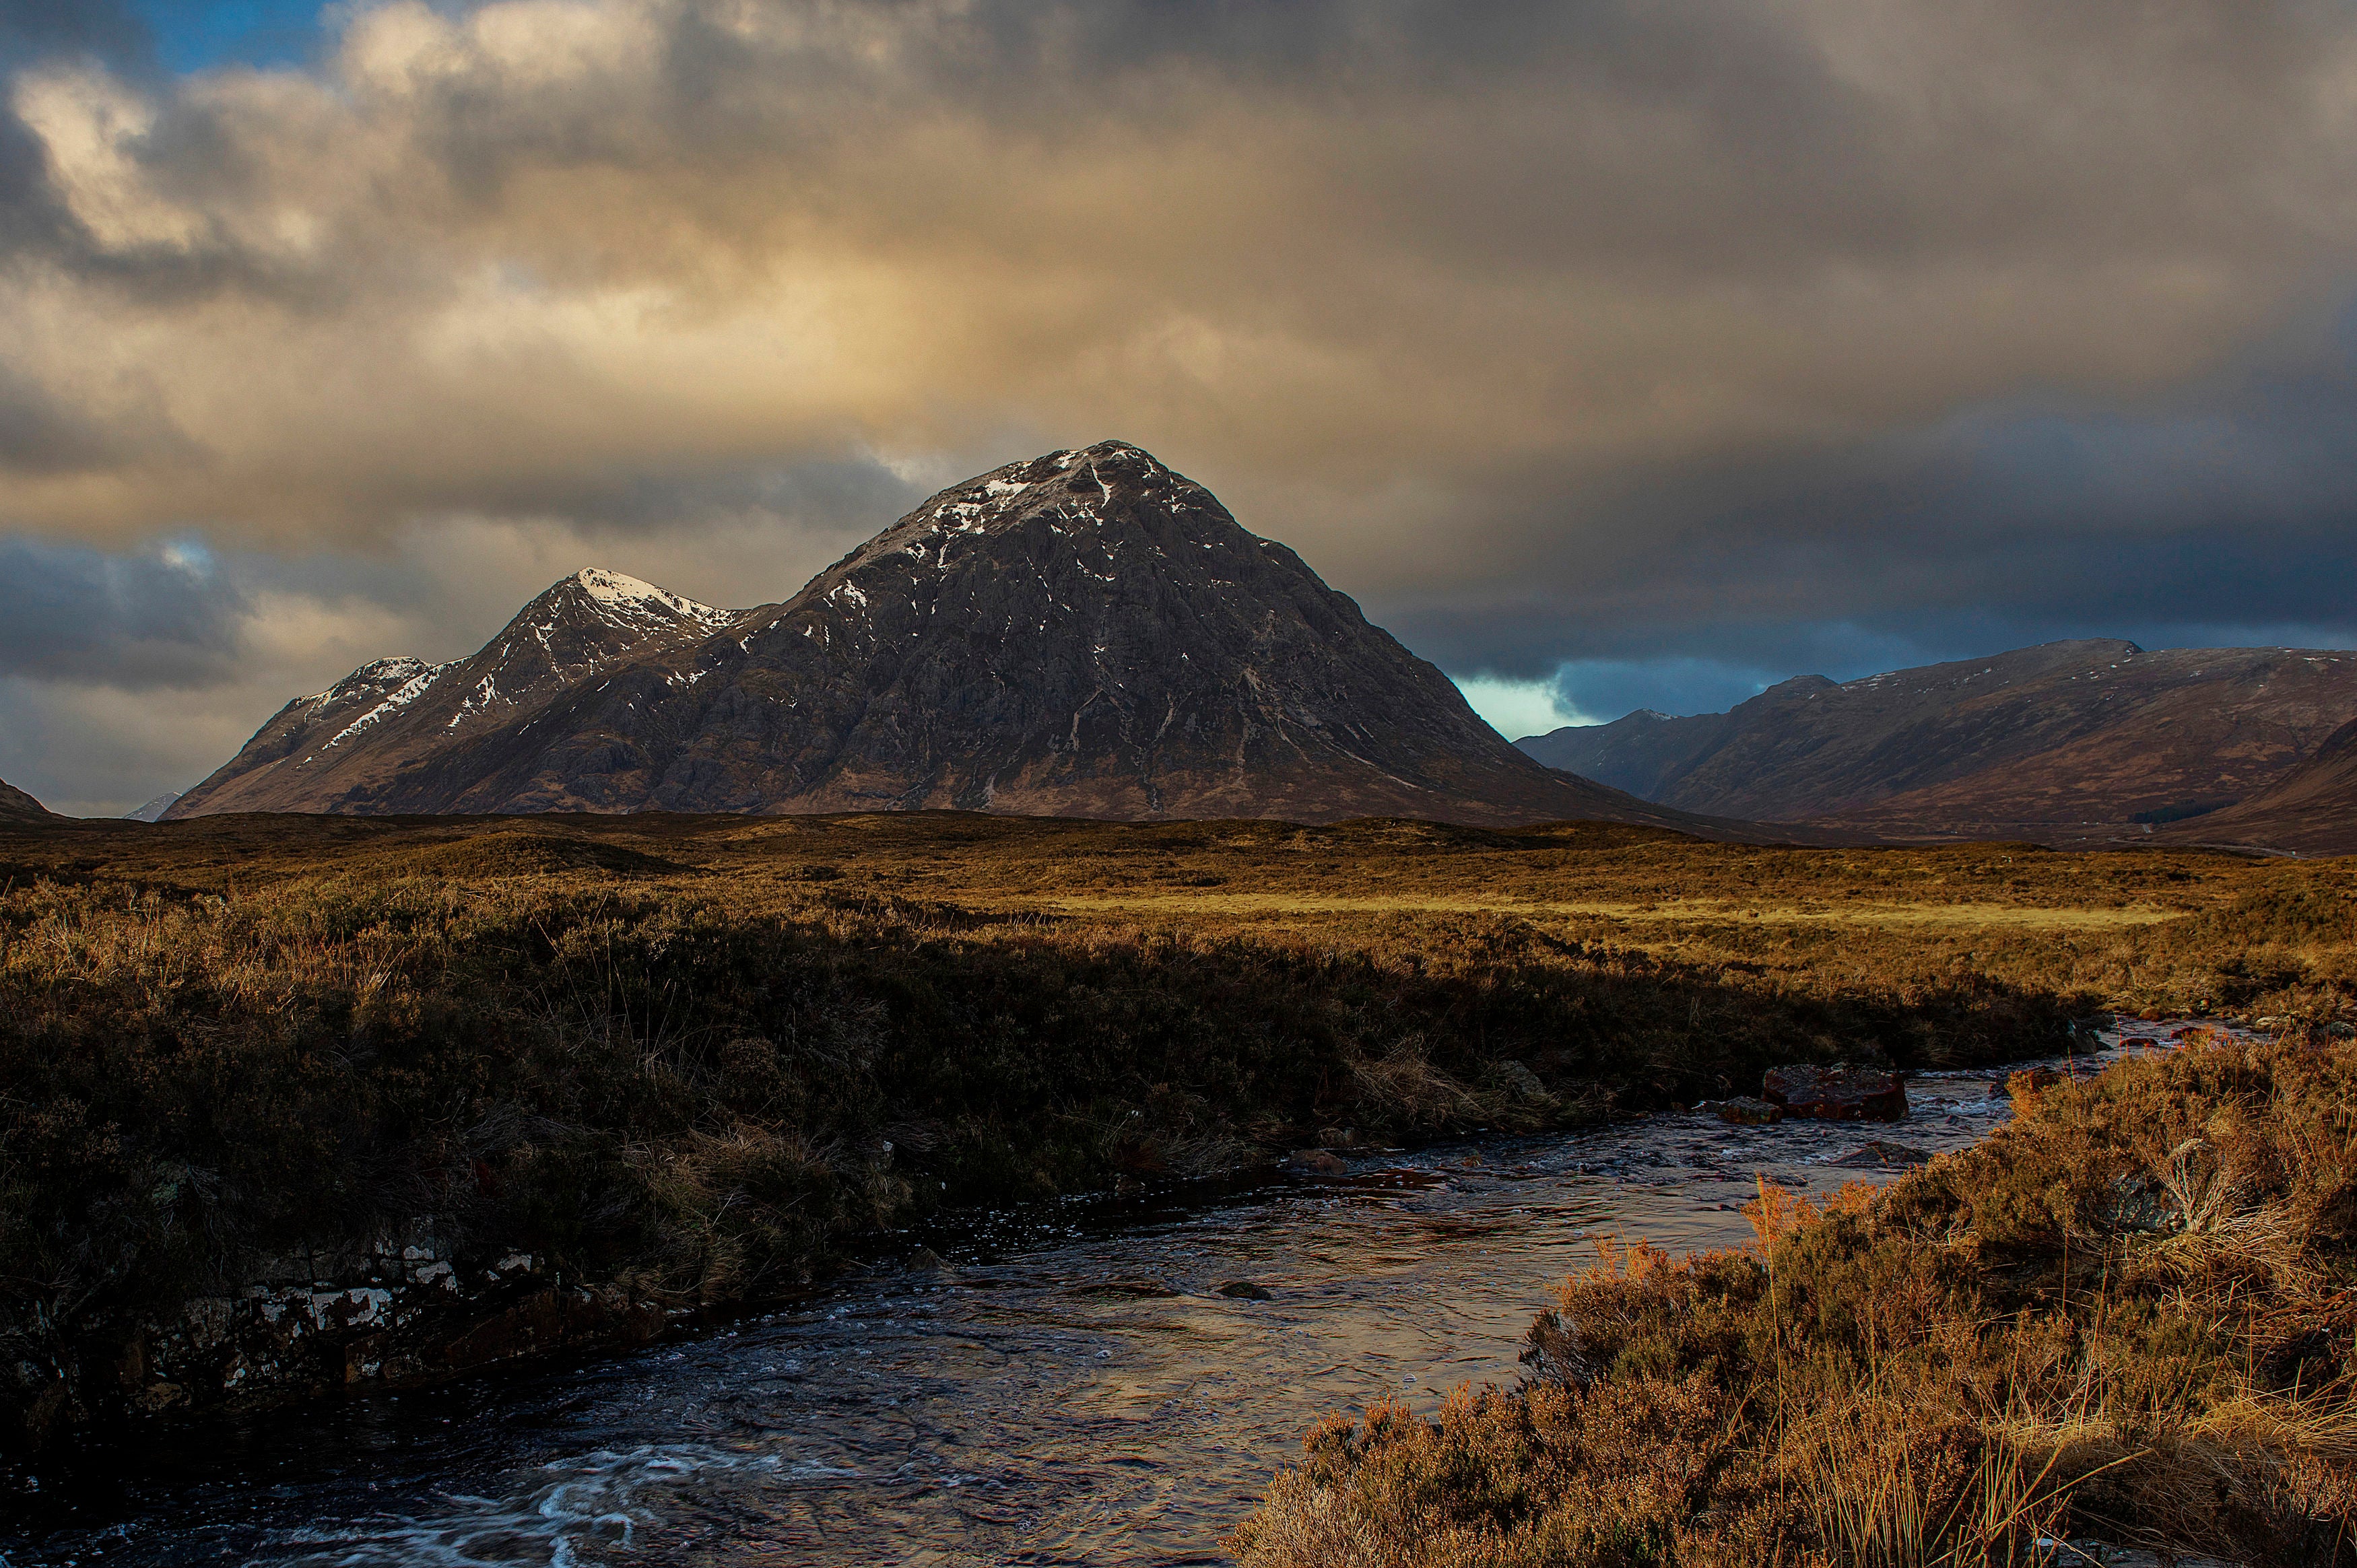 The fund will provide grants of up to £250,000 to protect Scotland’s biodiversity (Charlie Davidson/PA)